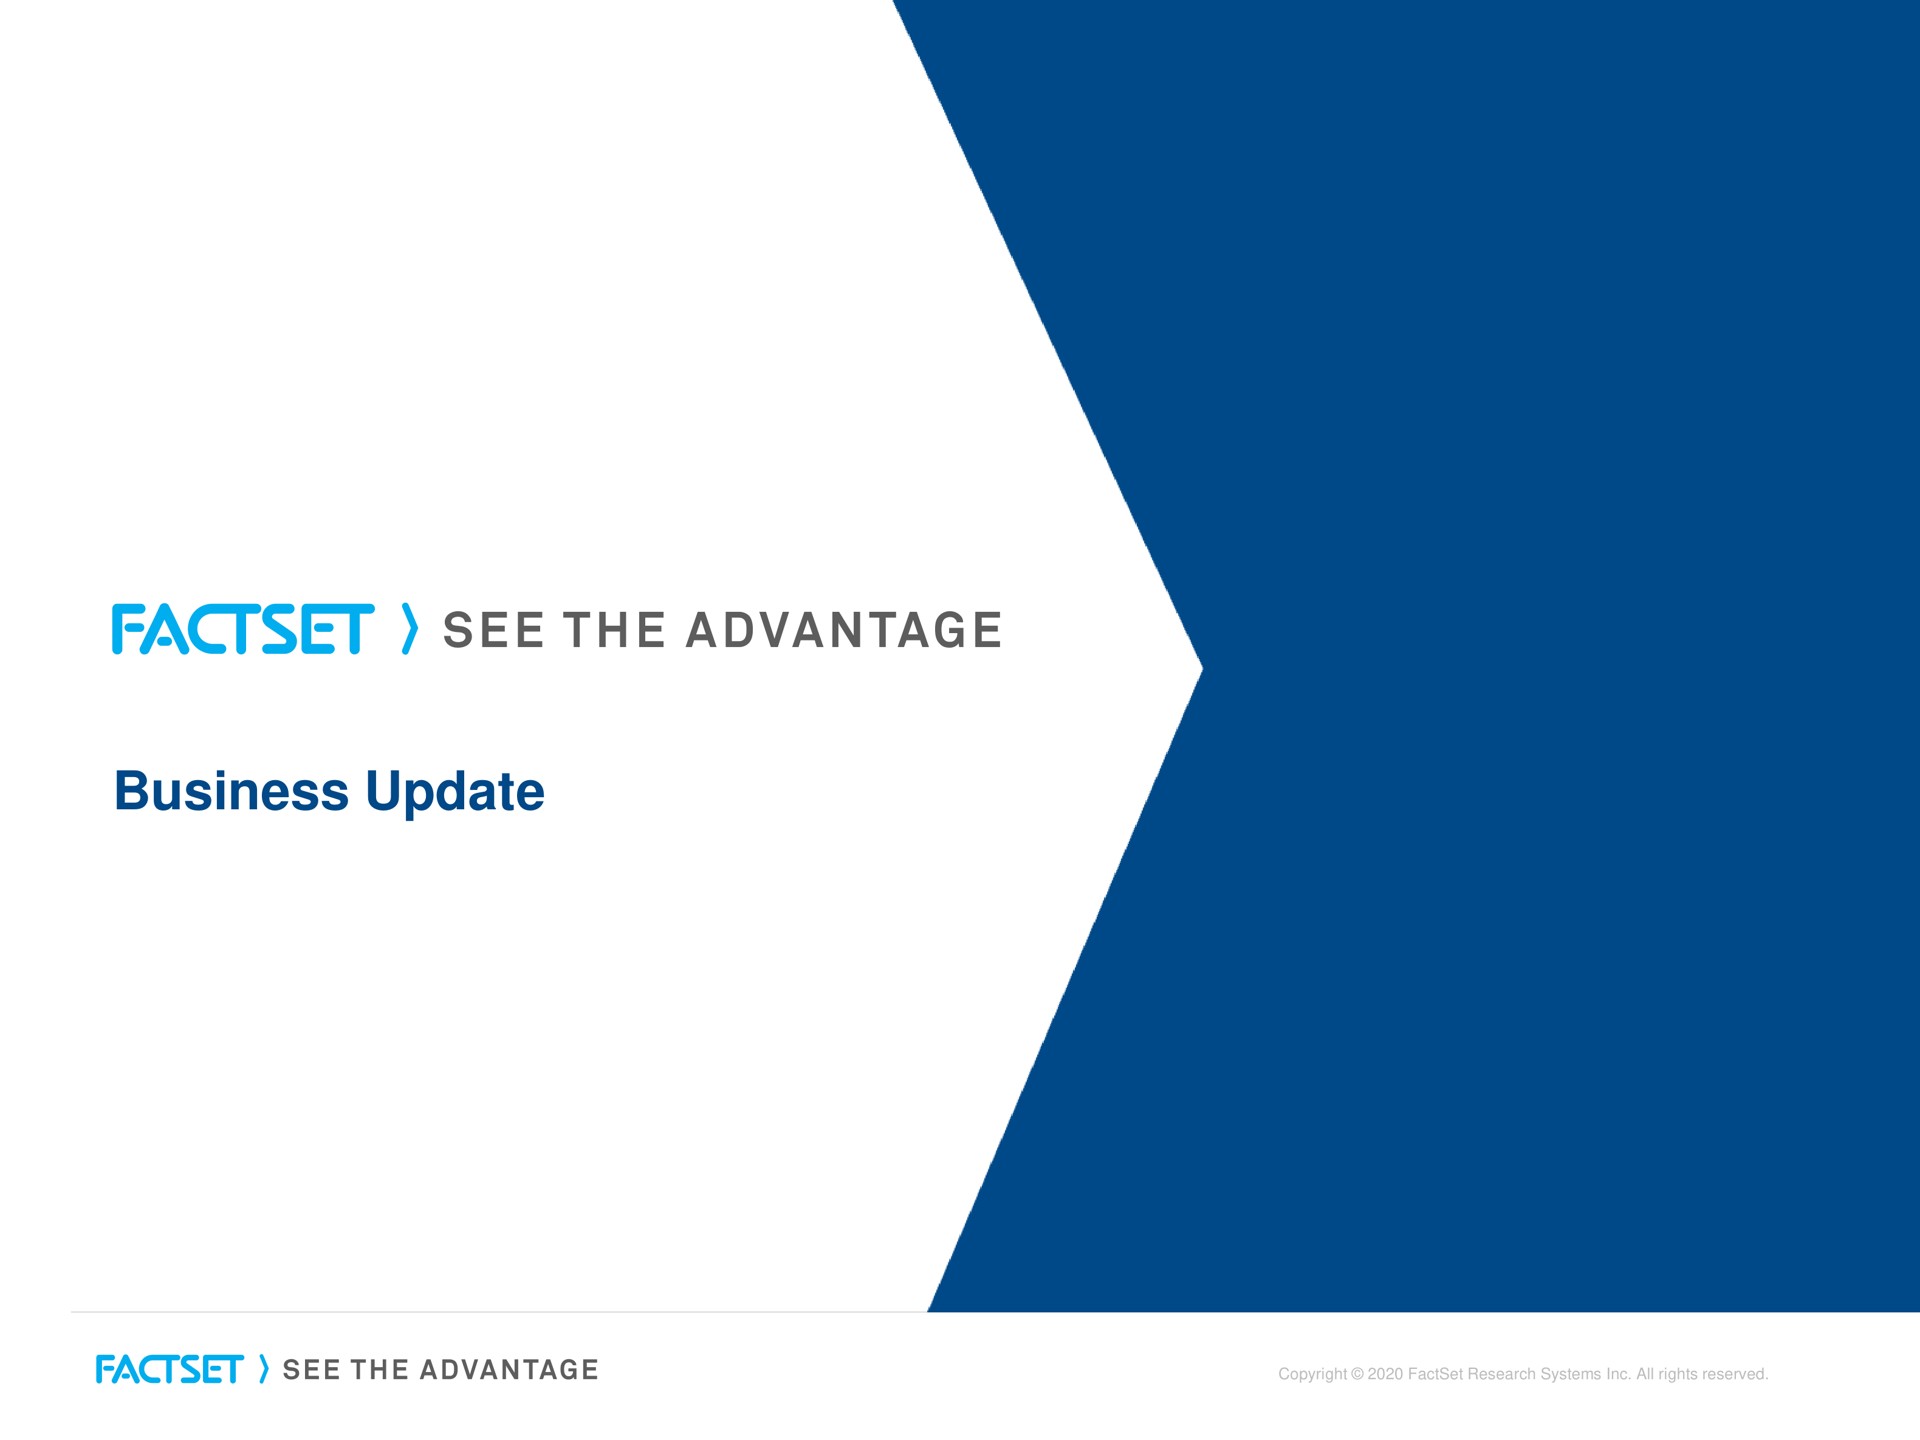 business update see the advantage | Factset